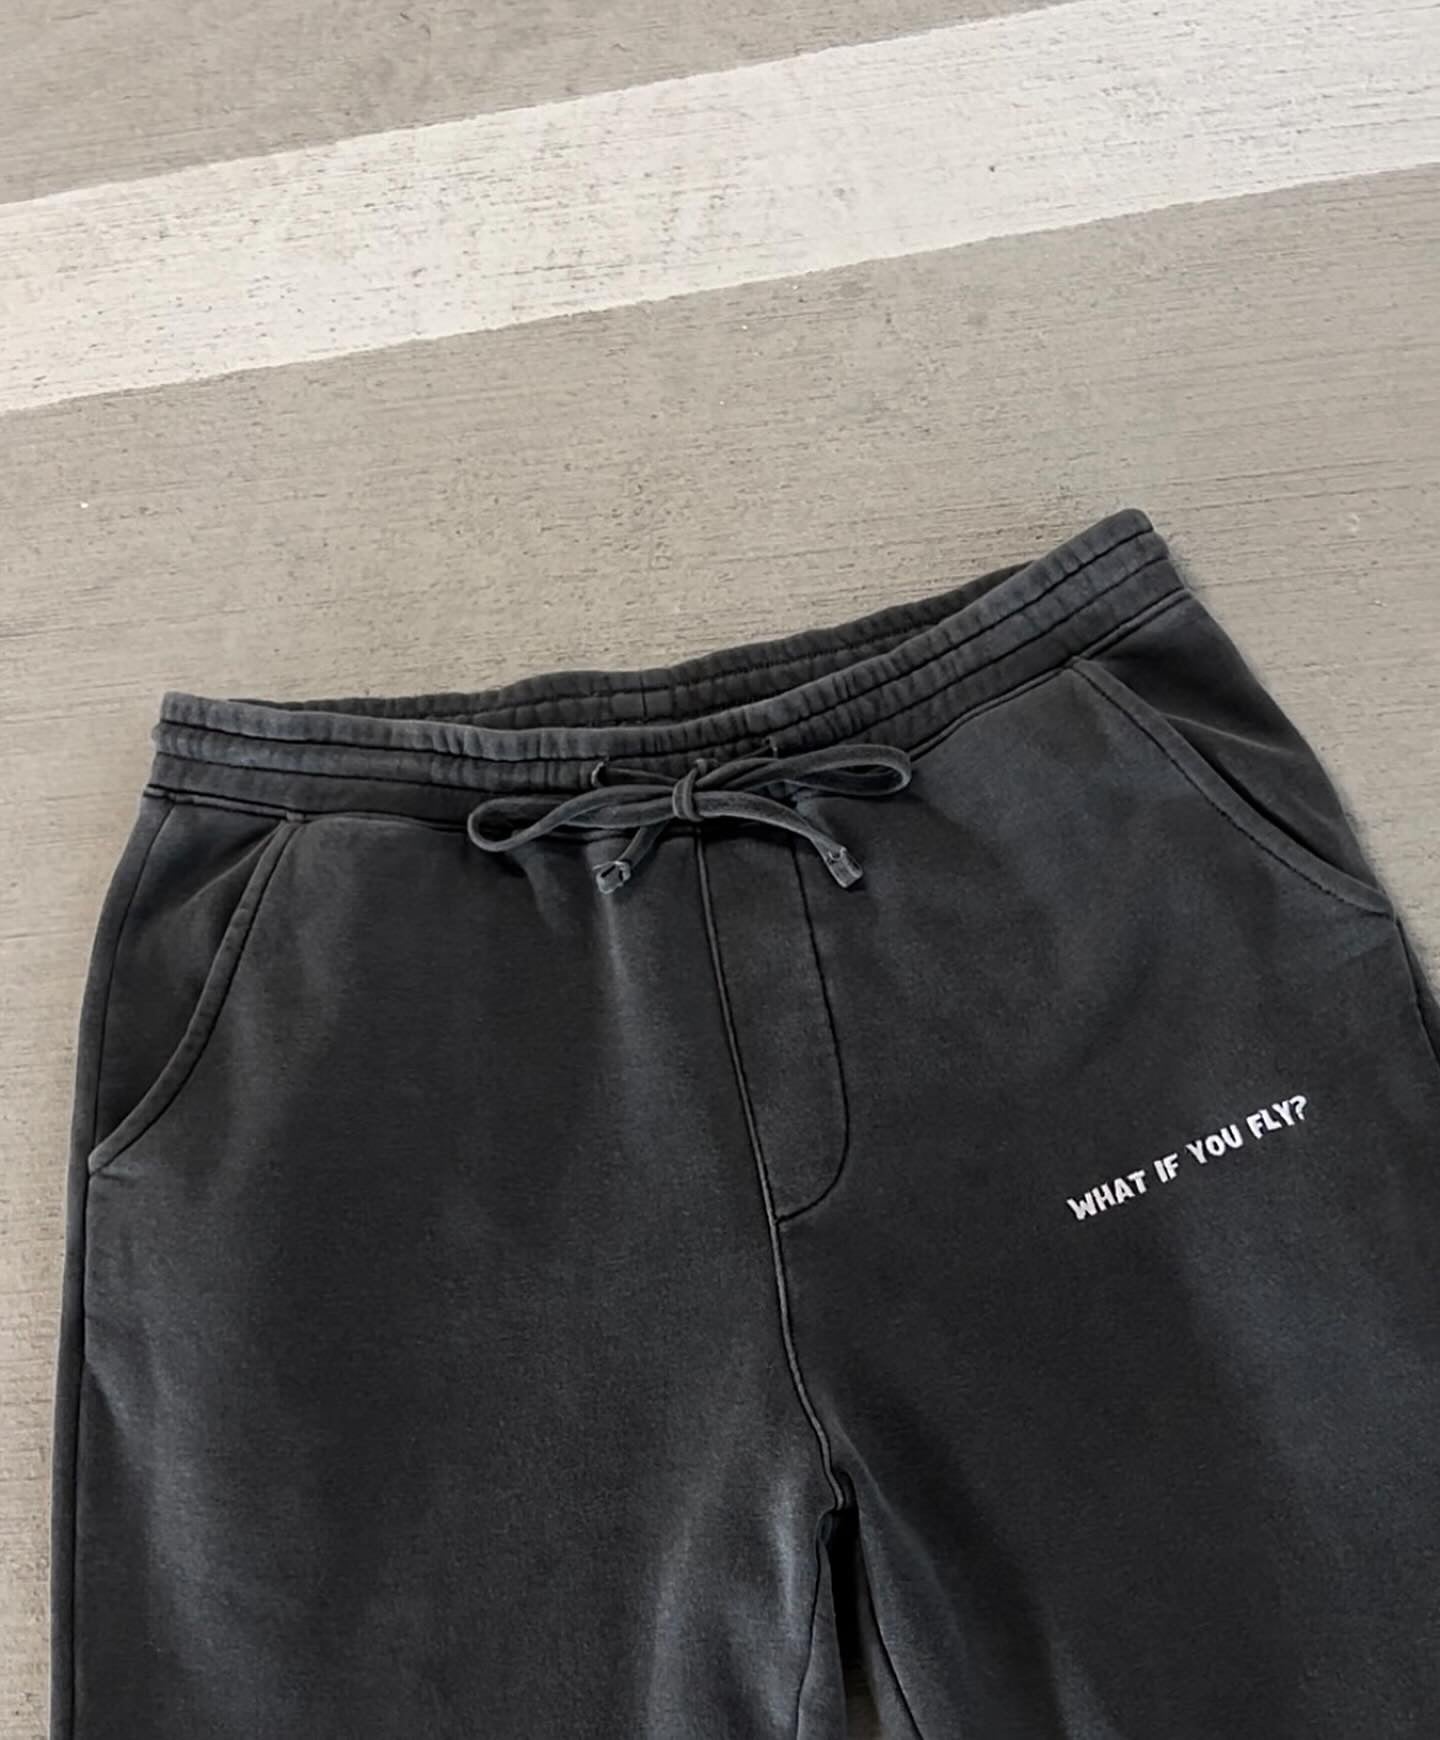 'What if you fly?' Pigment-dyed sweatpants - vintage gray